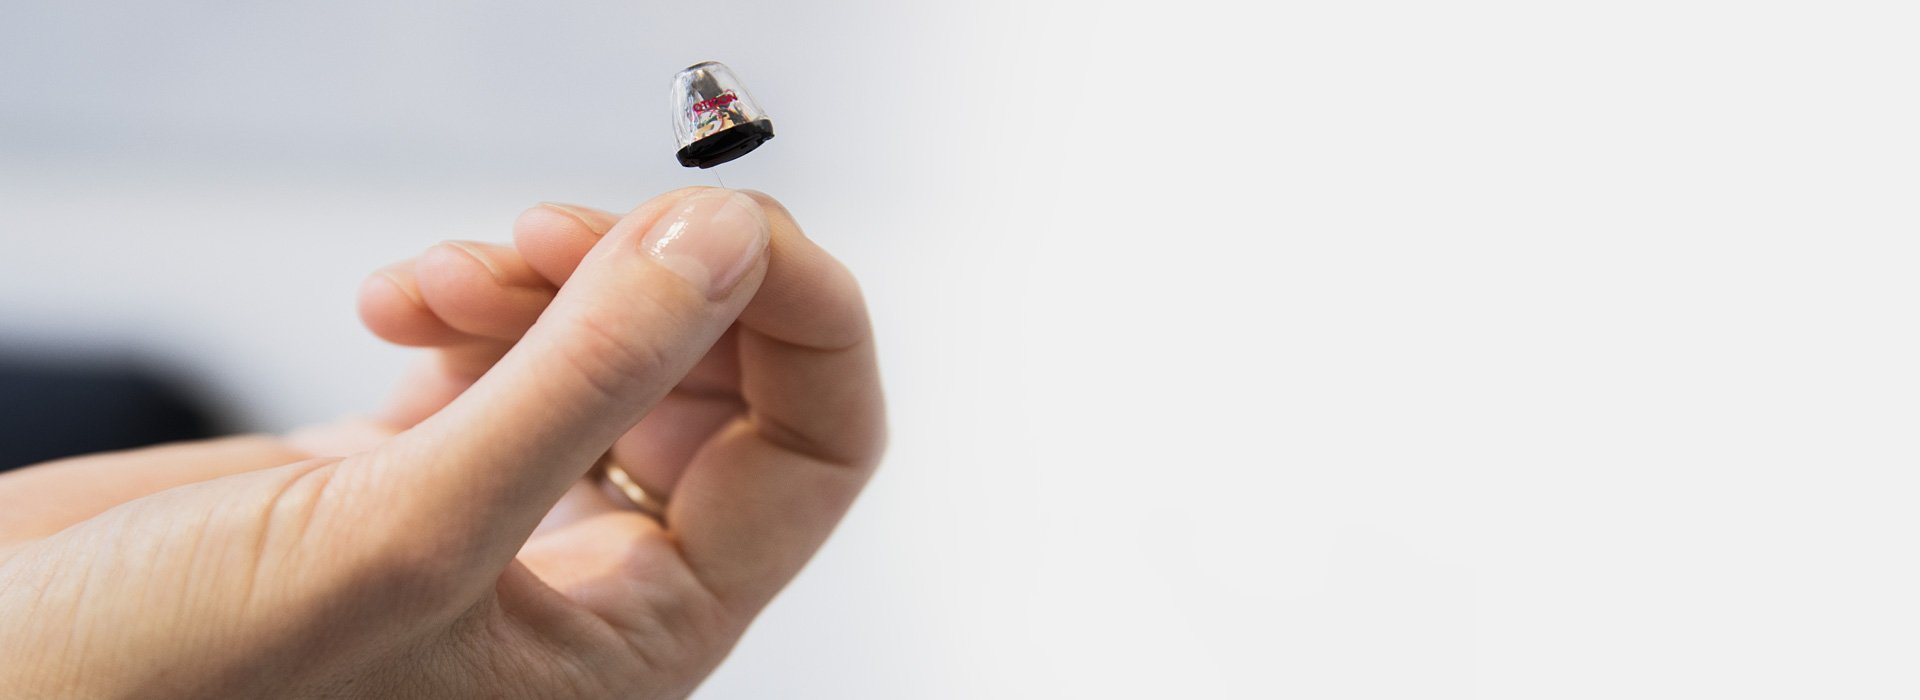 Image show hand holding a hearing aid